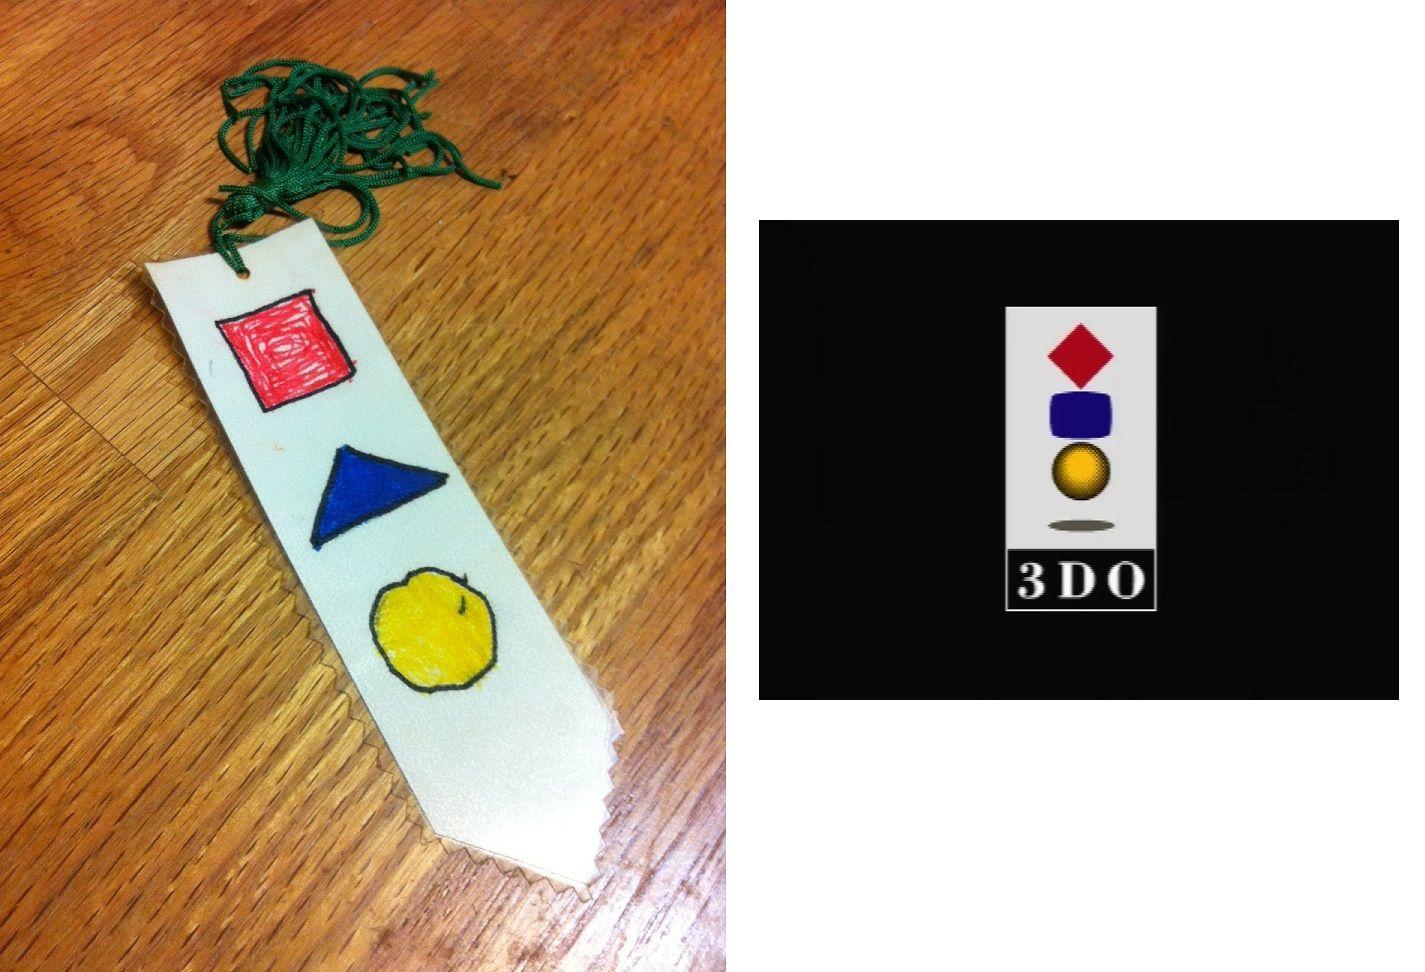 3DO Logo - Did My Sister Design the 3DO Logo... At Age 4? | Austin videogame ...